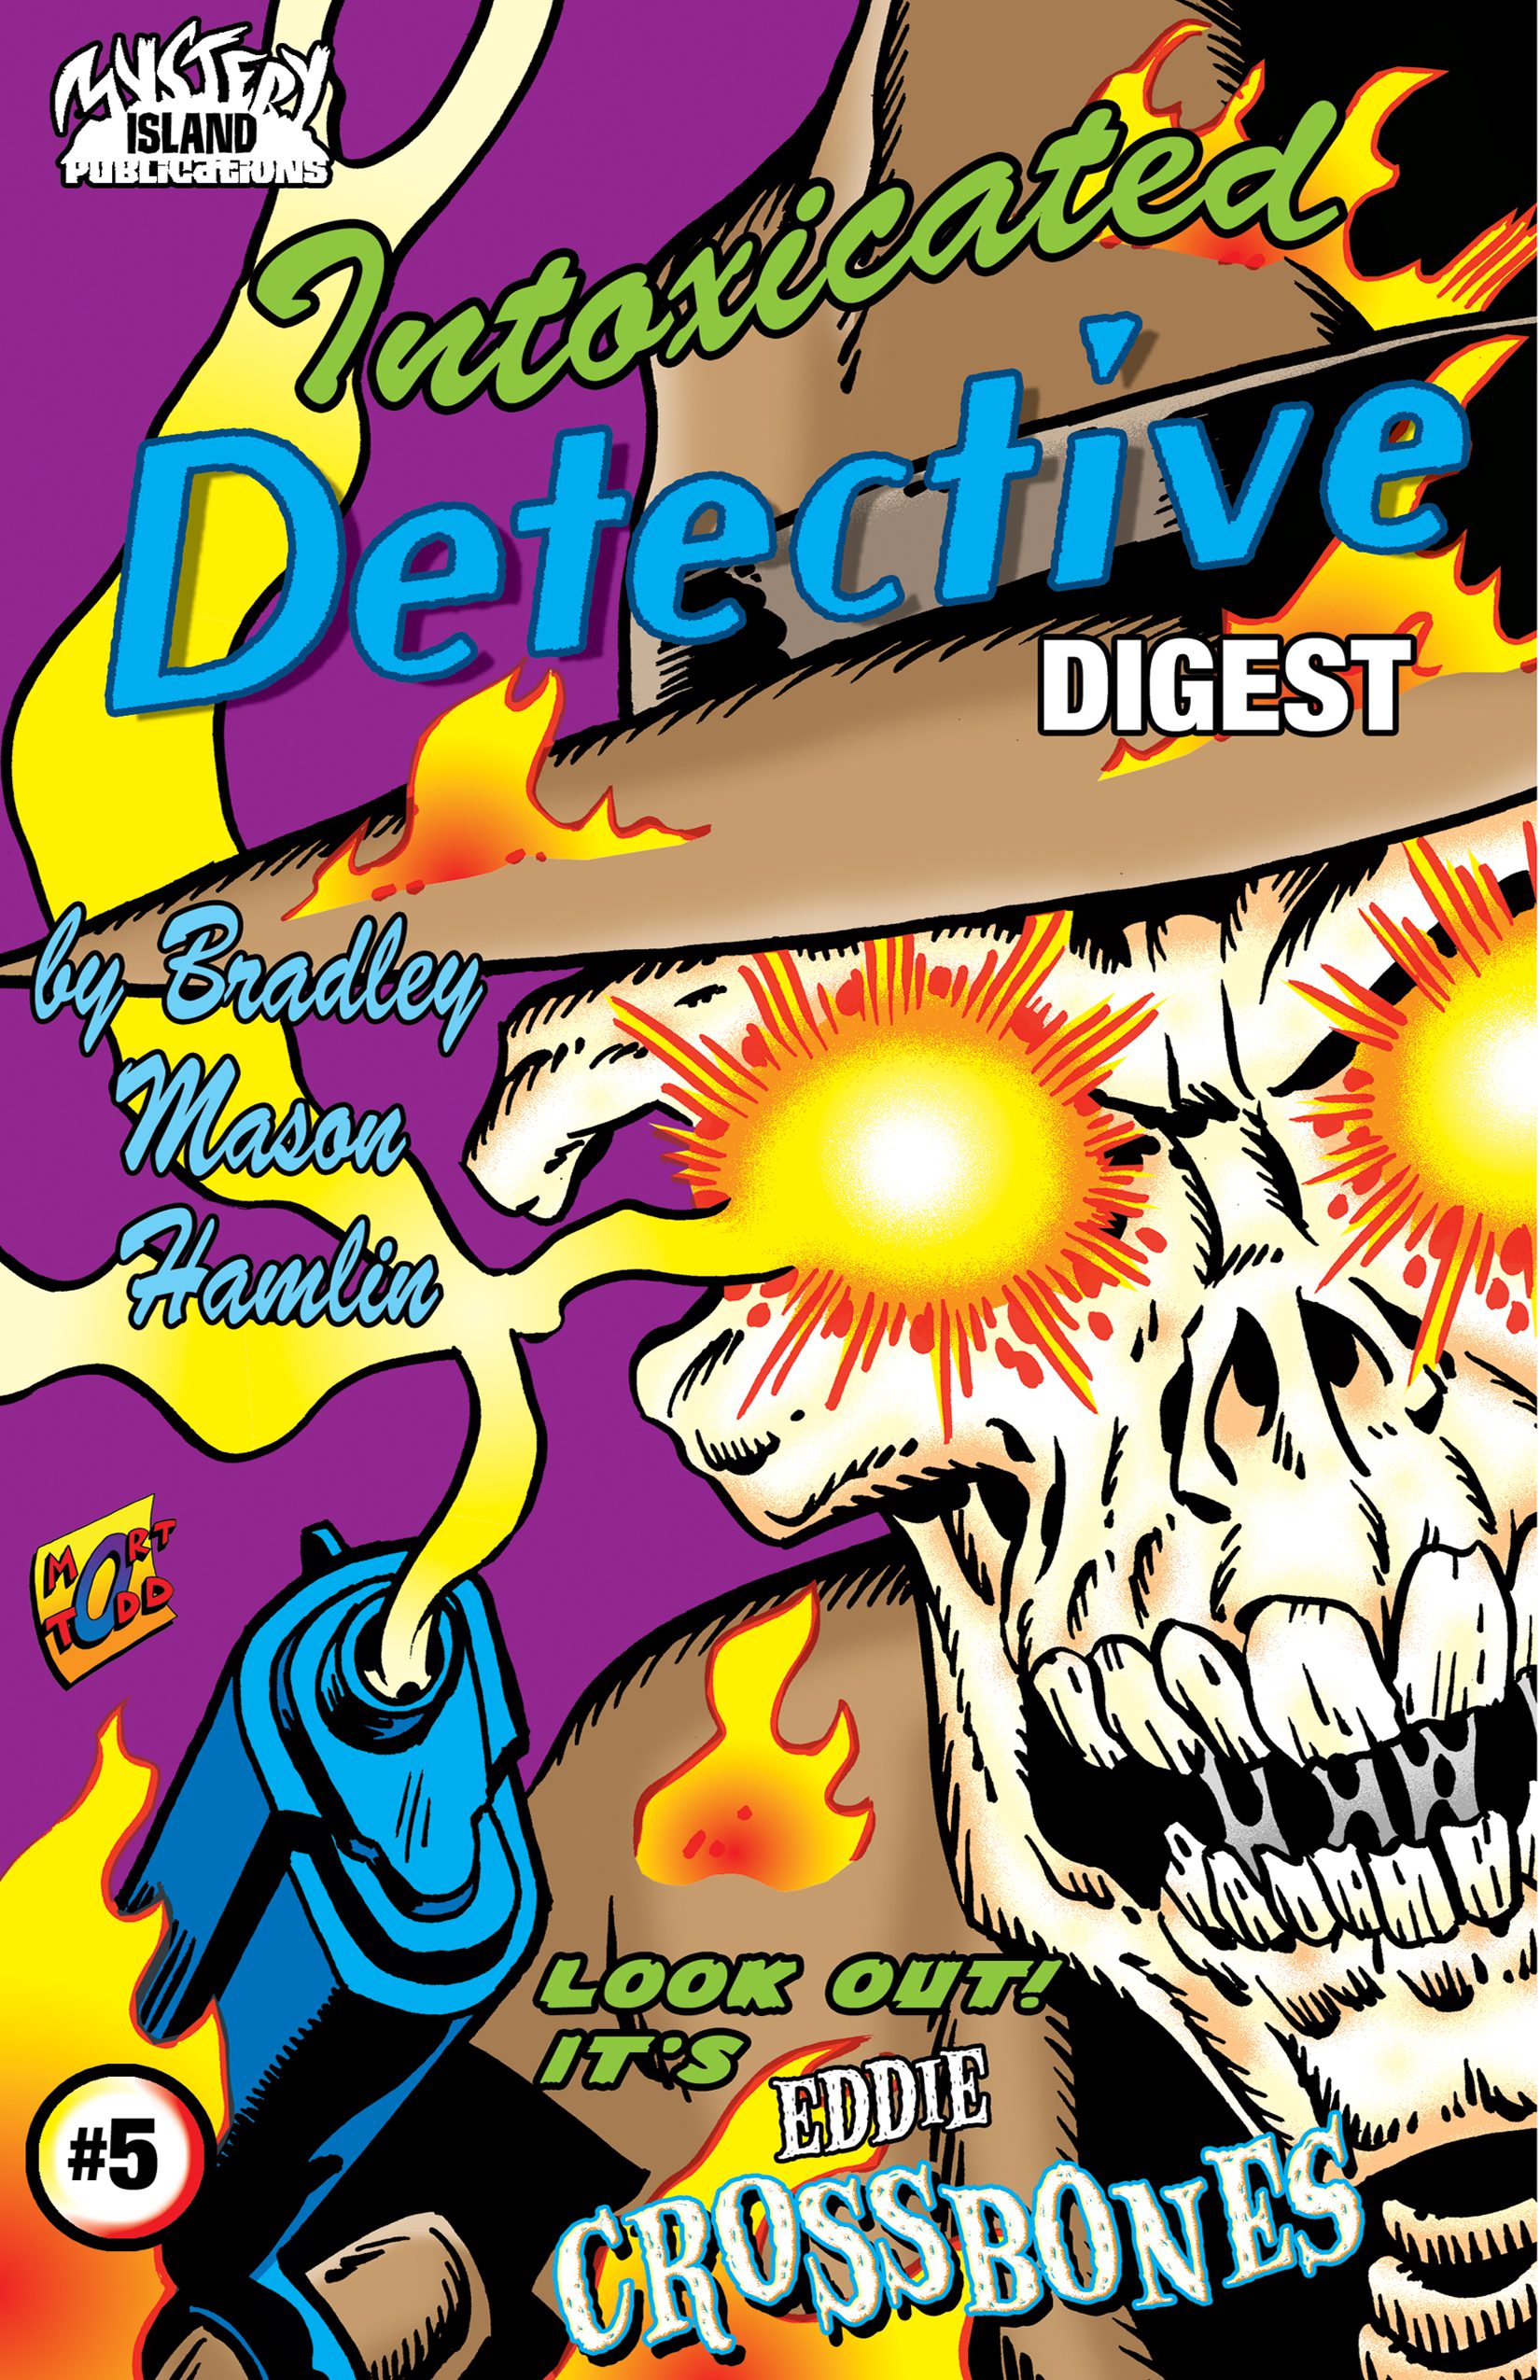 Intoxicated Detective Issue Five